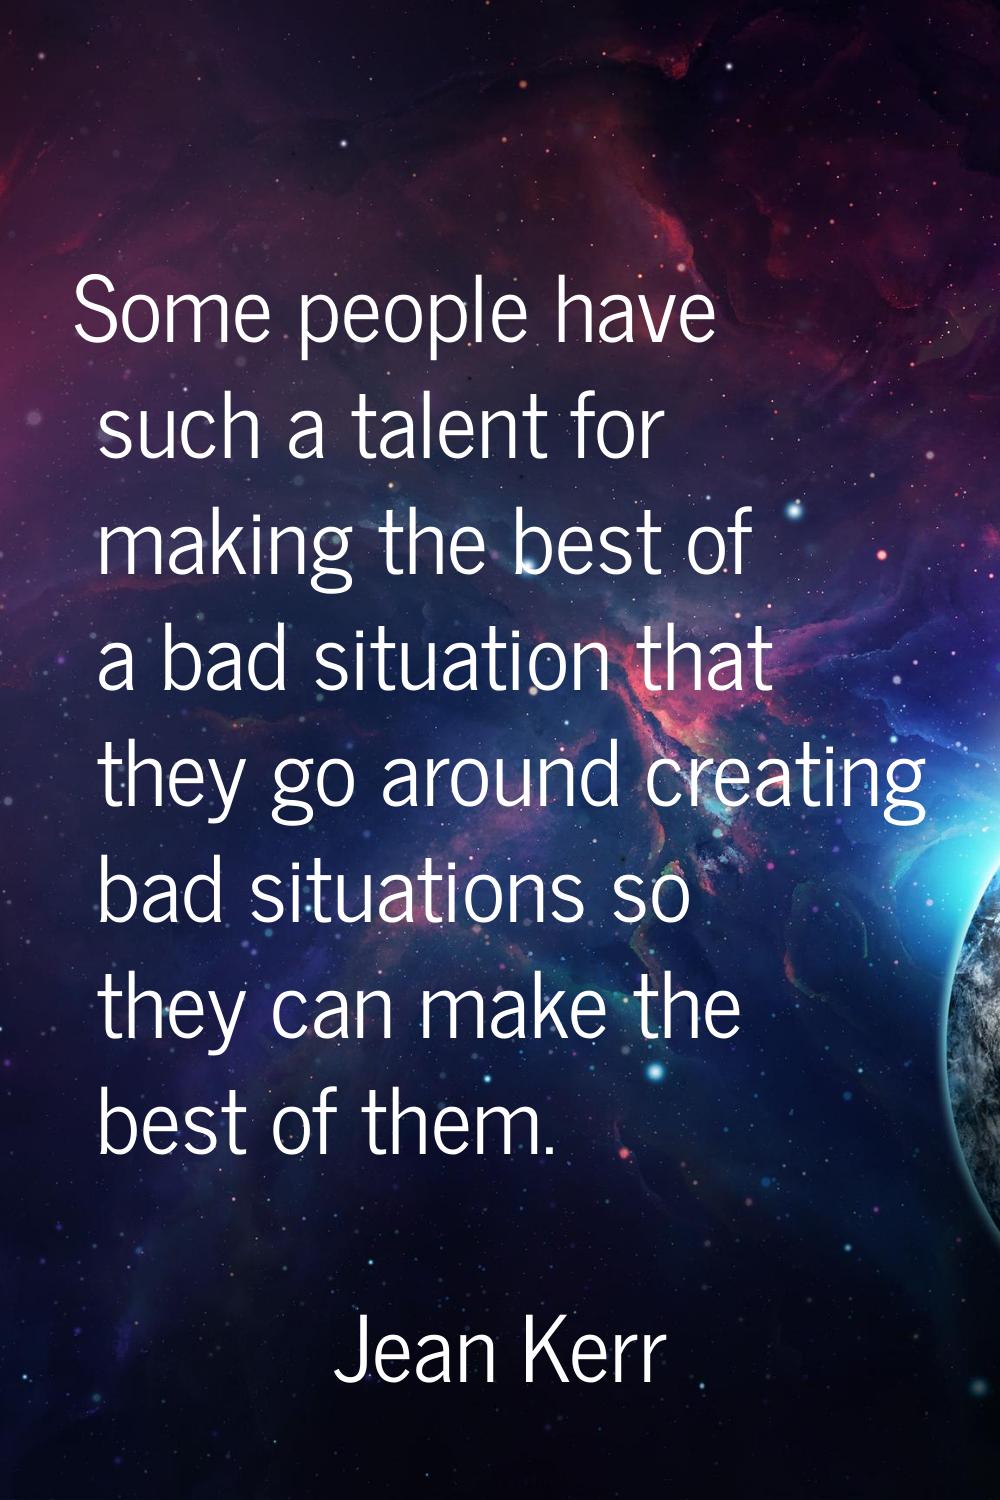 Some people have such a talent for making the best of a bad situation that they go around creating 